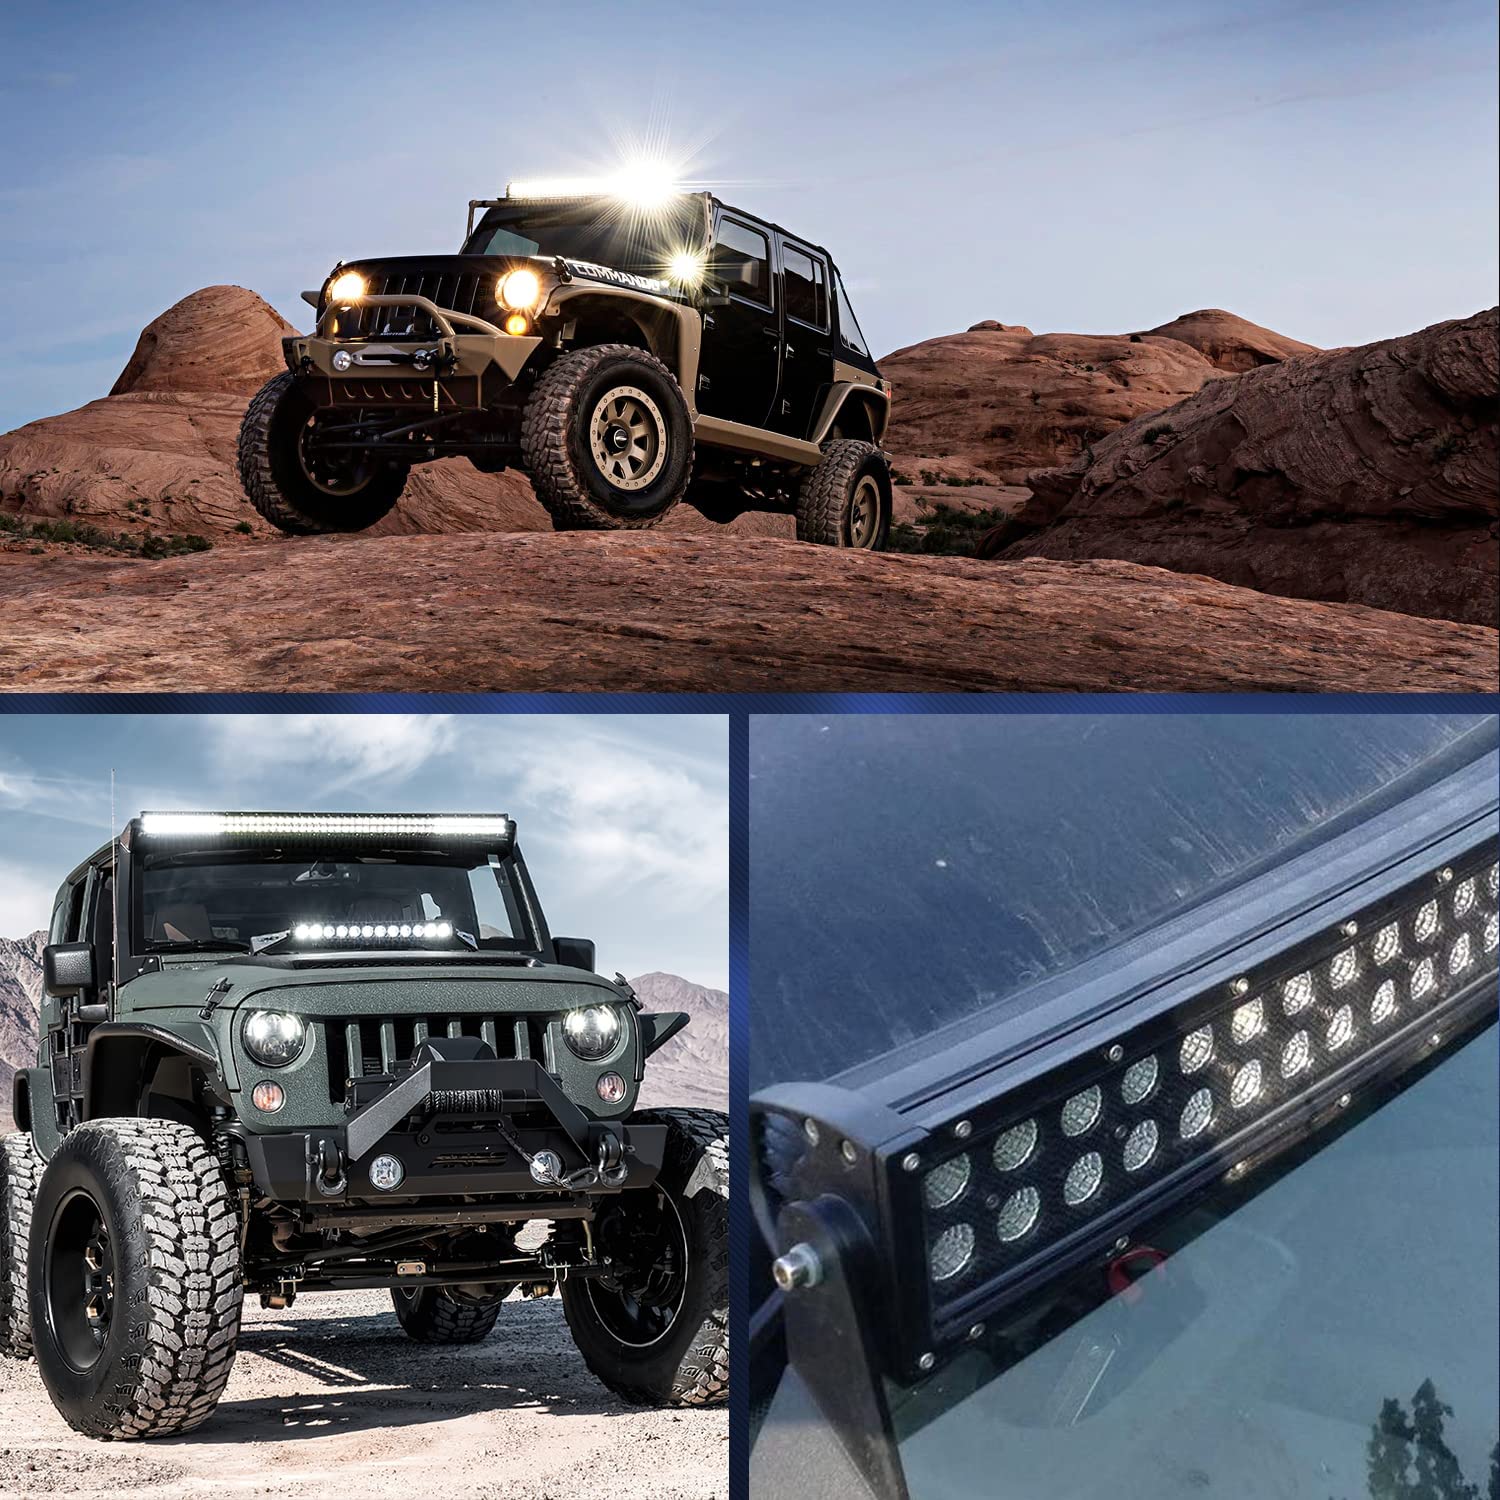 32 Inch 180W Curved Flood Spot Combo LED Light Bar with 12V 5Pin